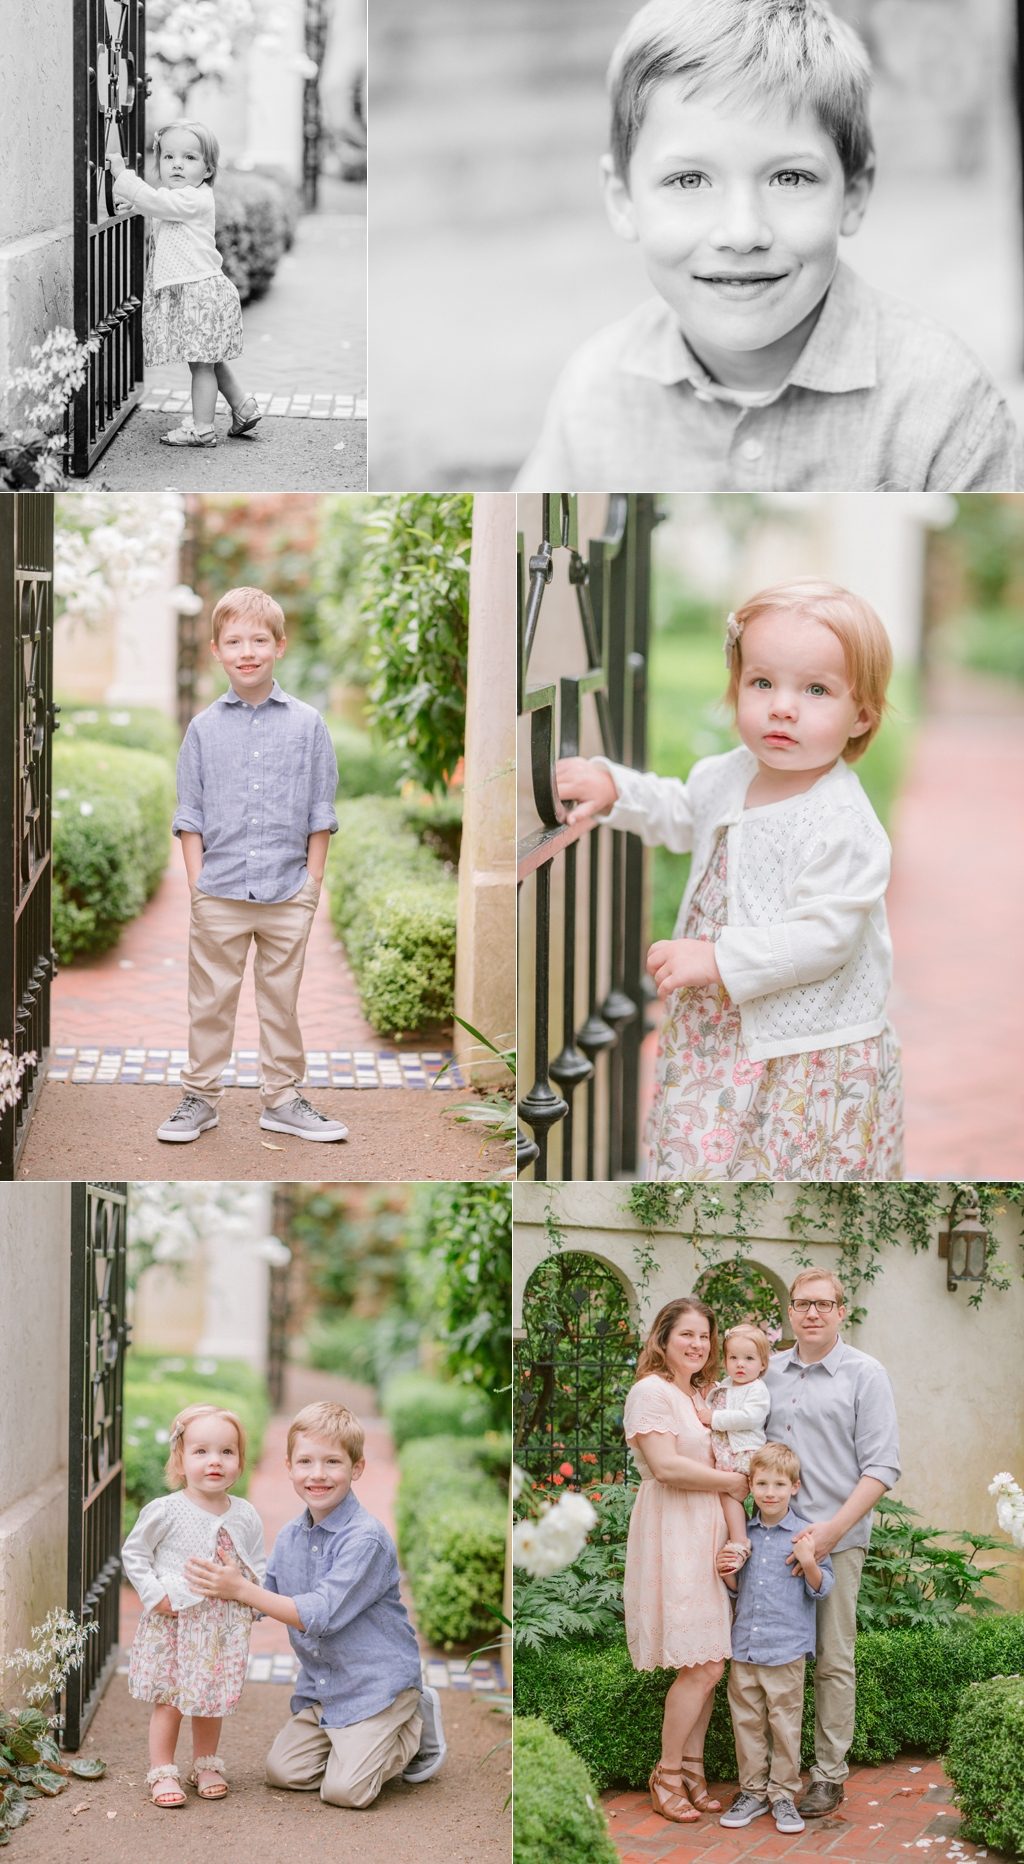 Spring family portraits in St. Louis